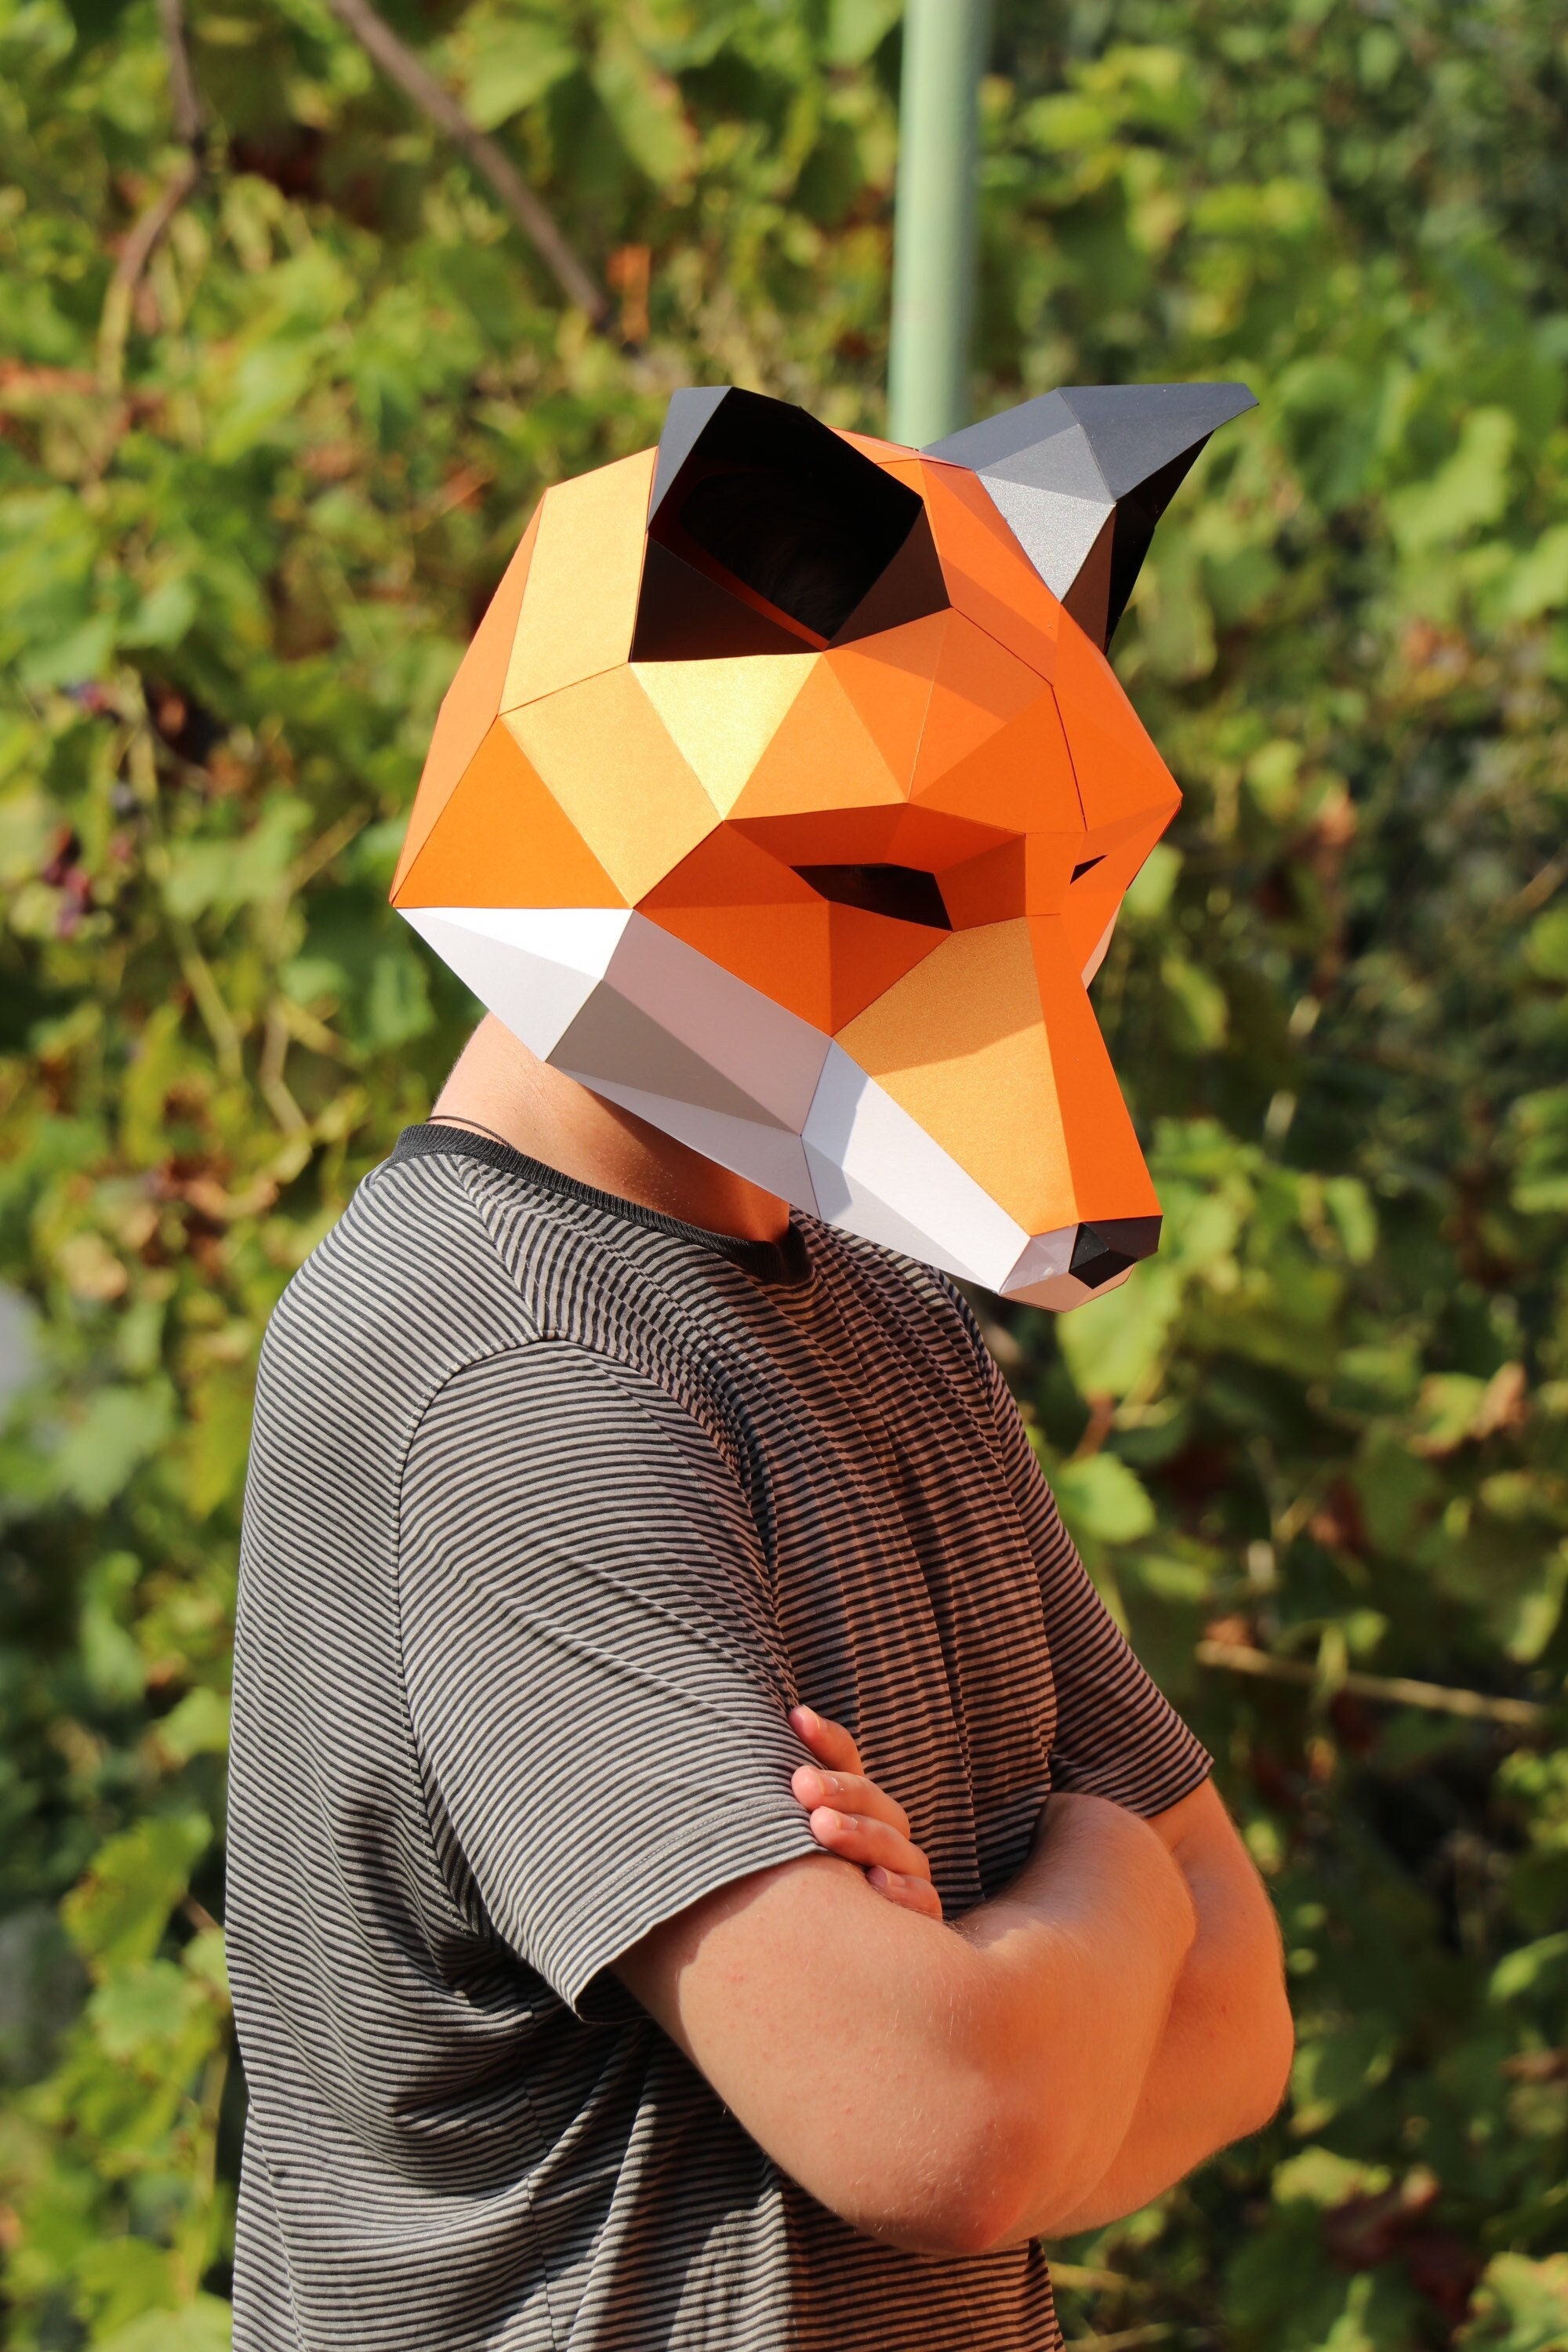 Fox Mask Template DIY No Sew Mask Pattern. Instantly Make a Paper